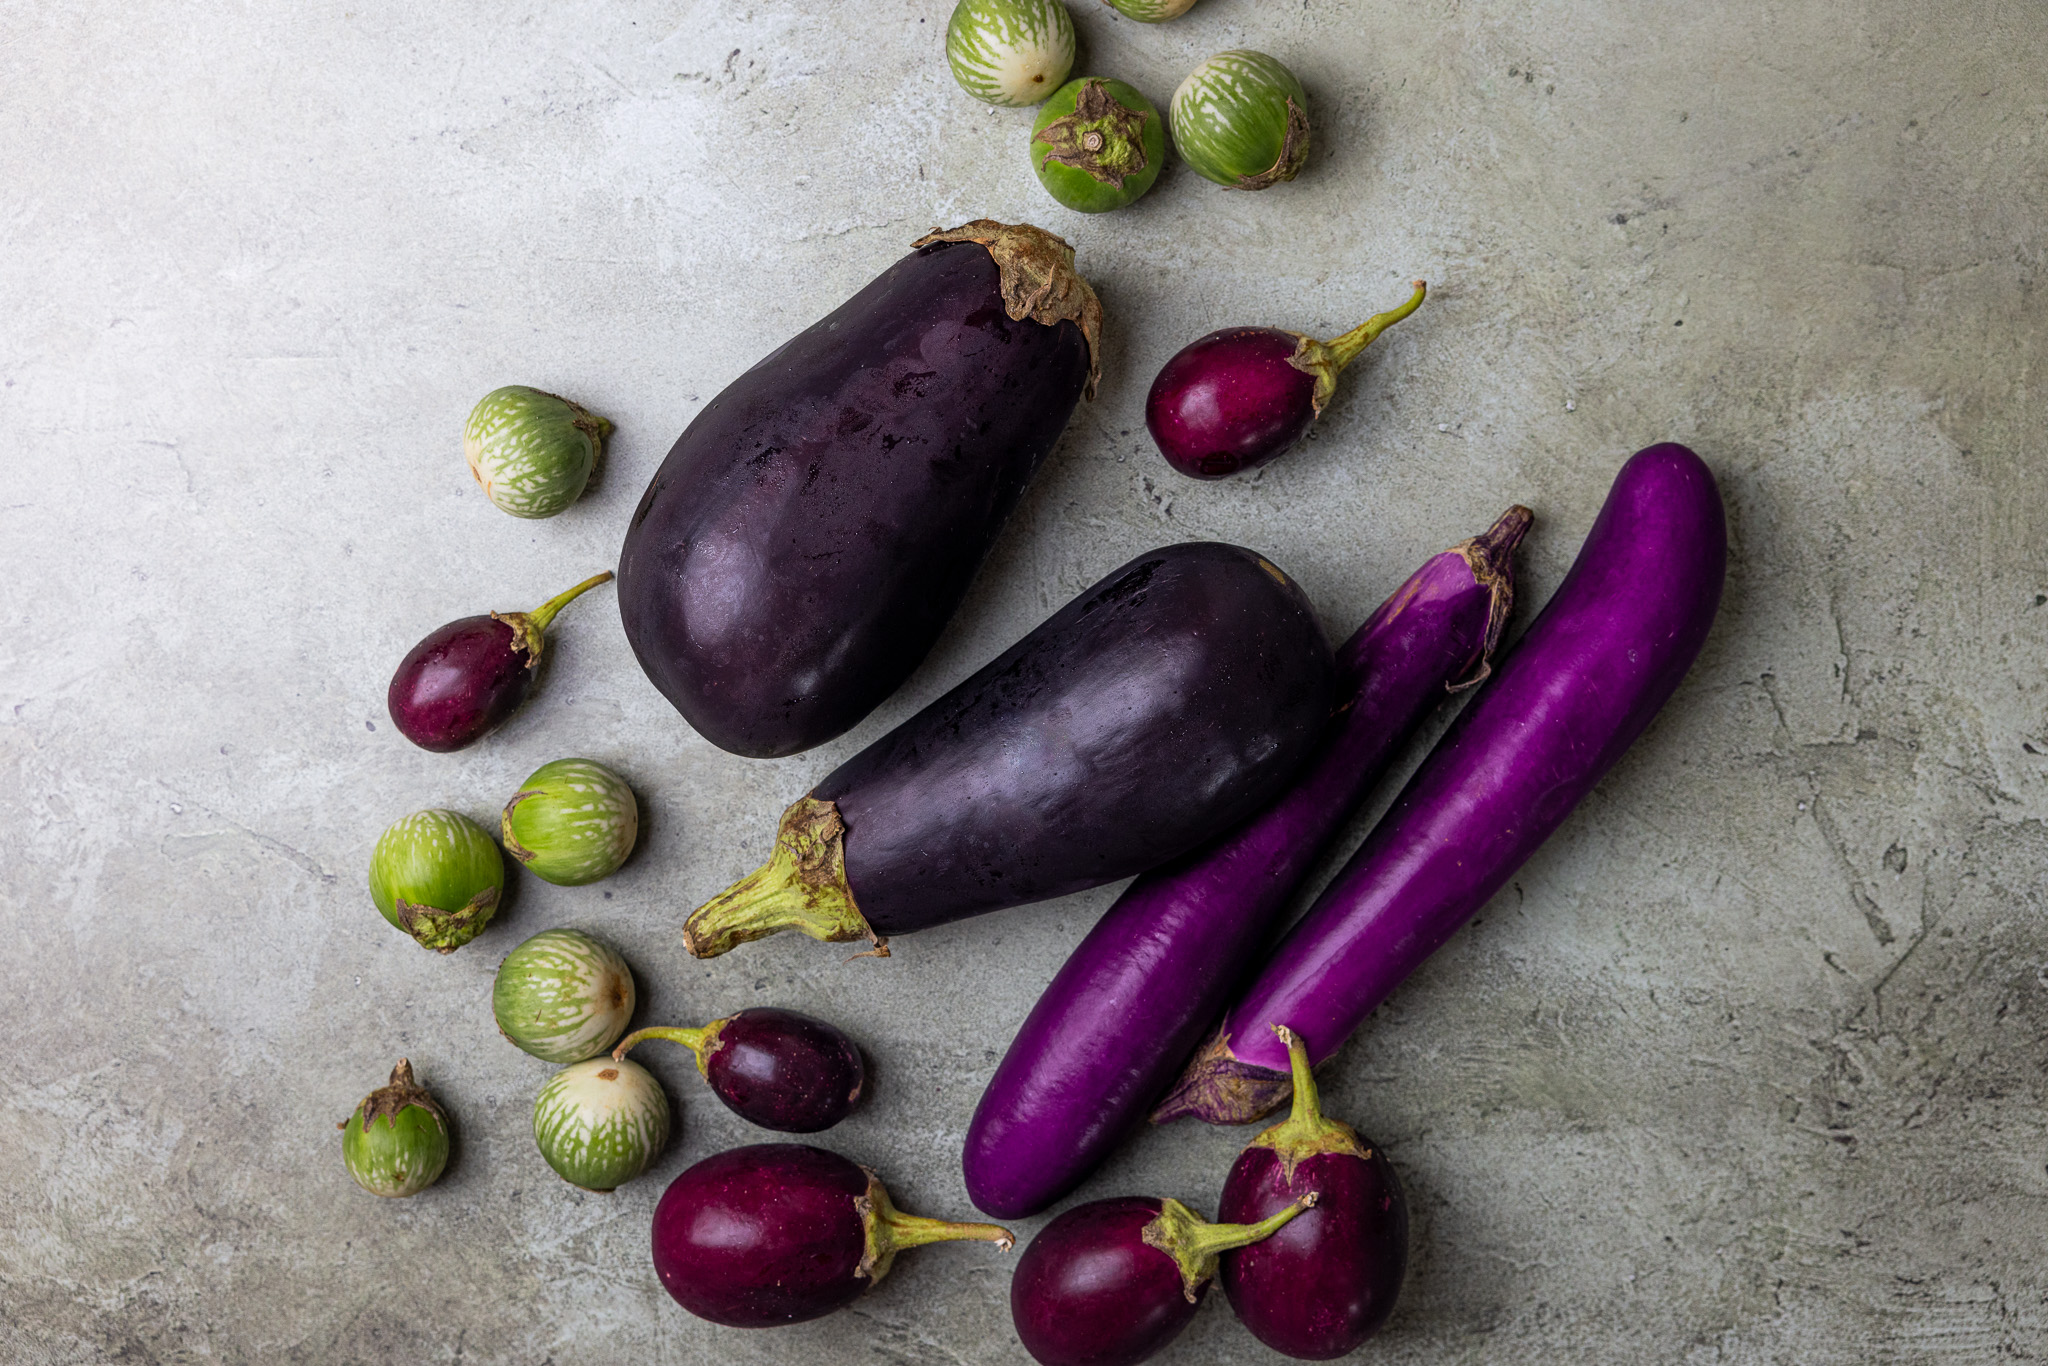 guide-to-eggplant-a158479cafd0c37914314f15